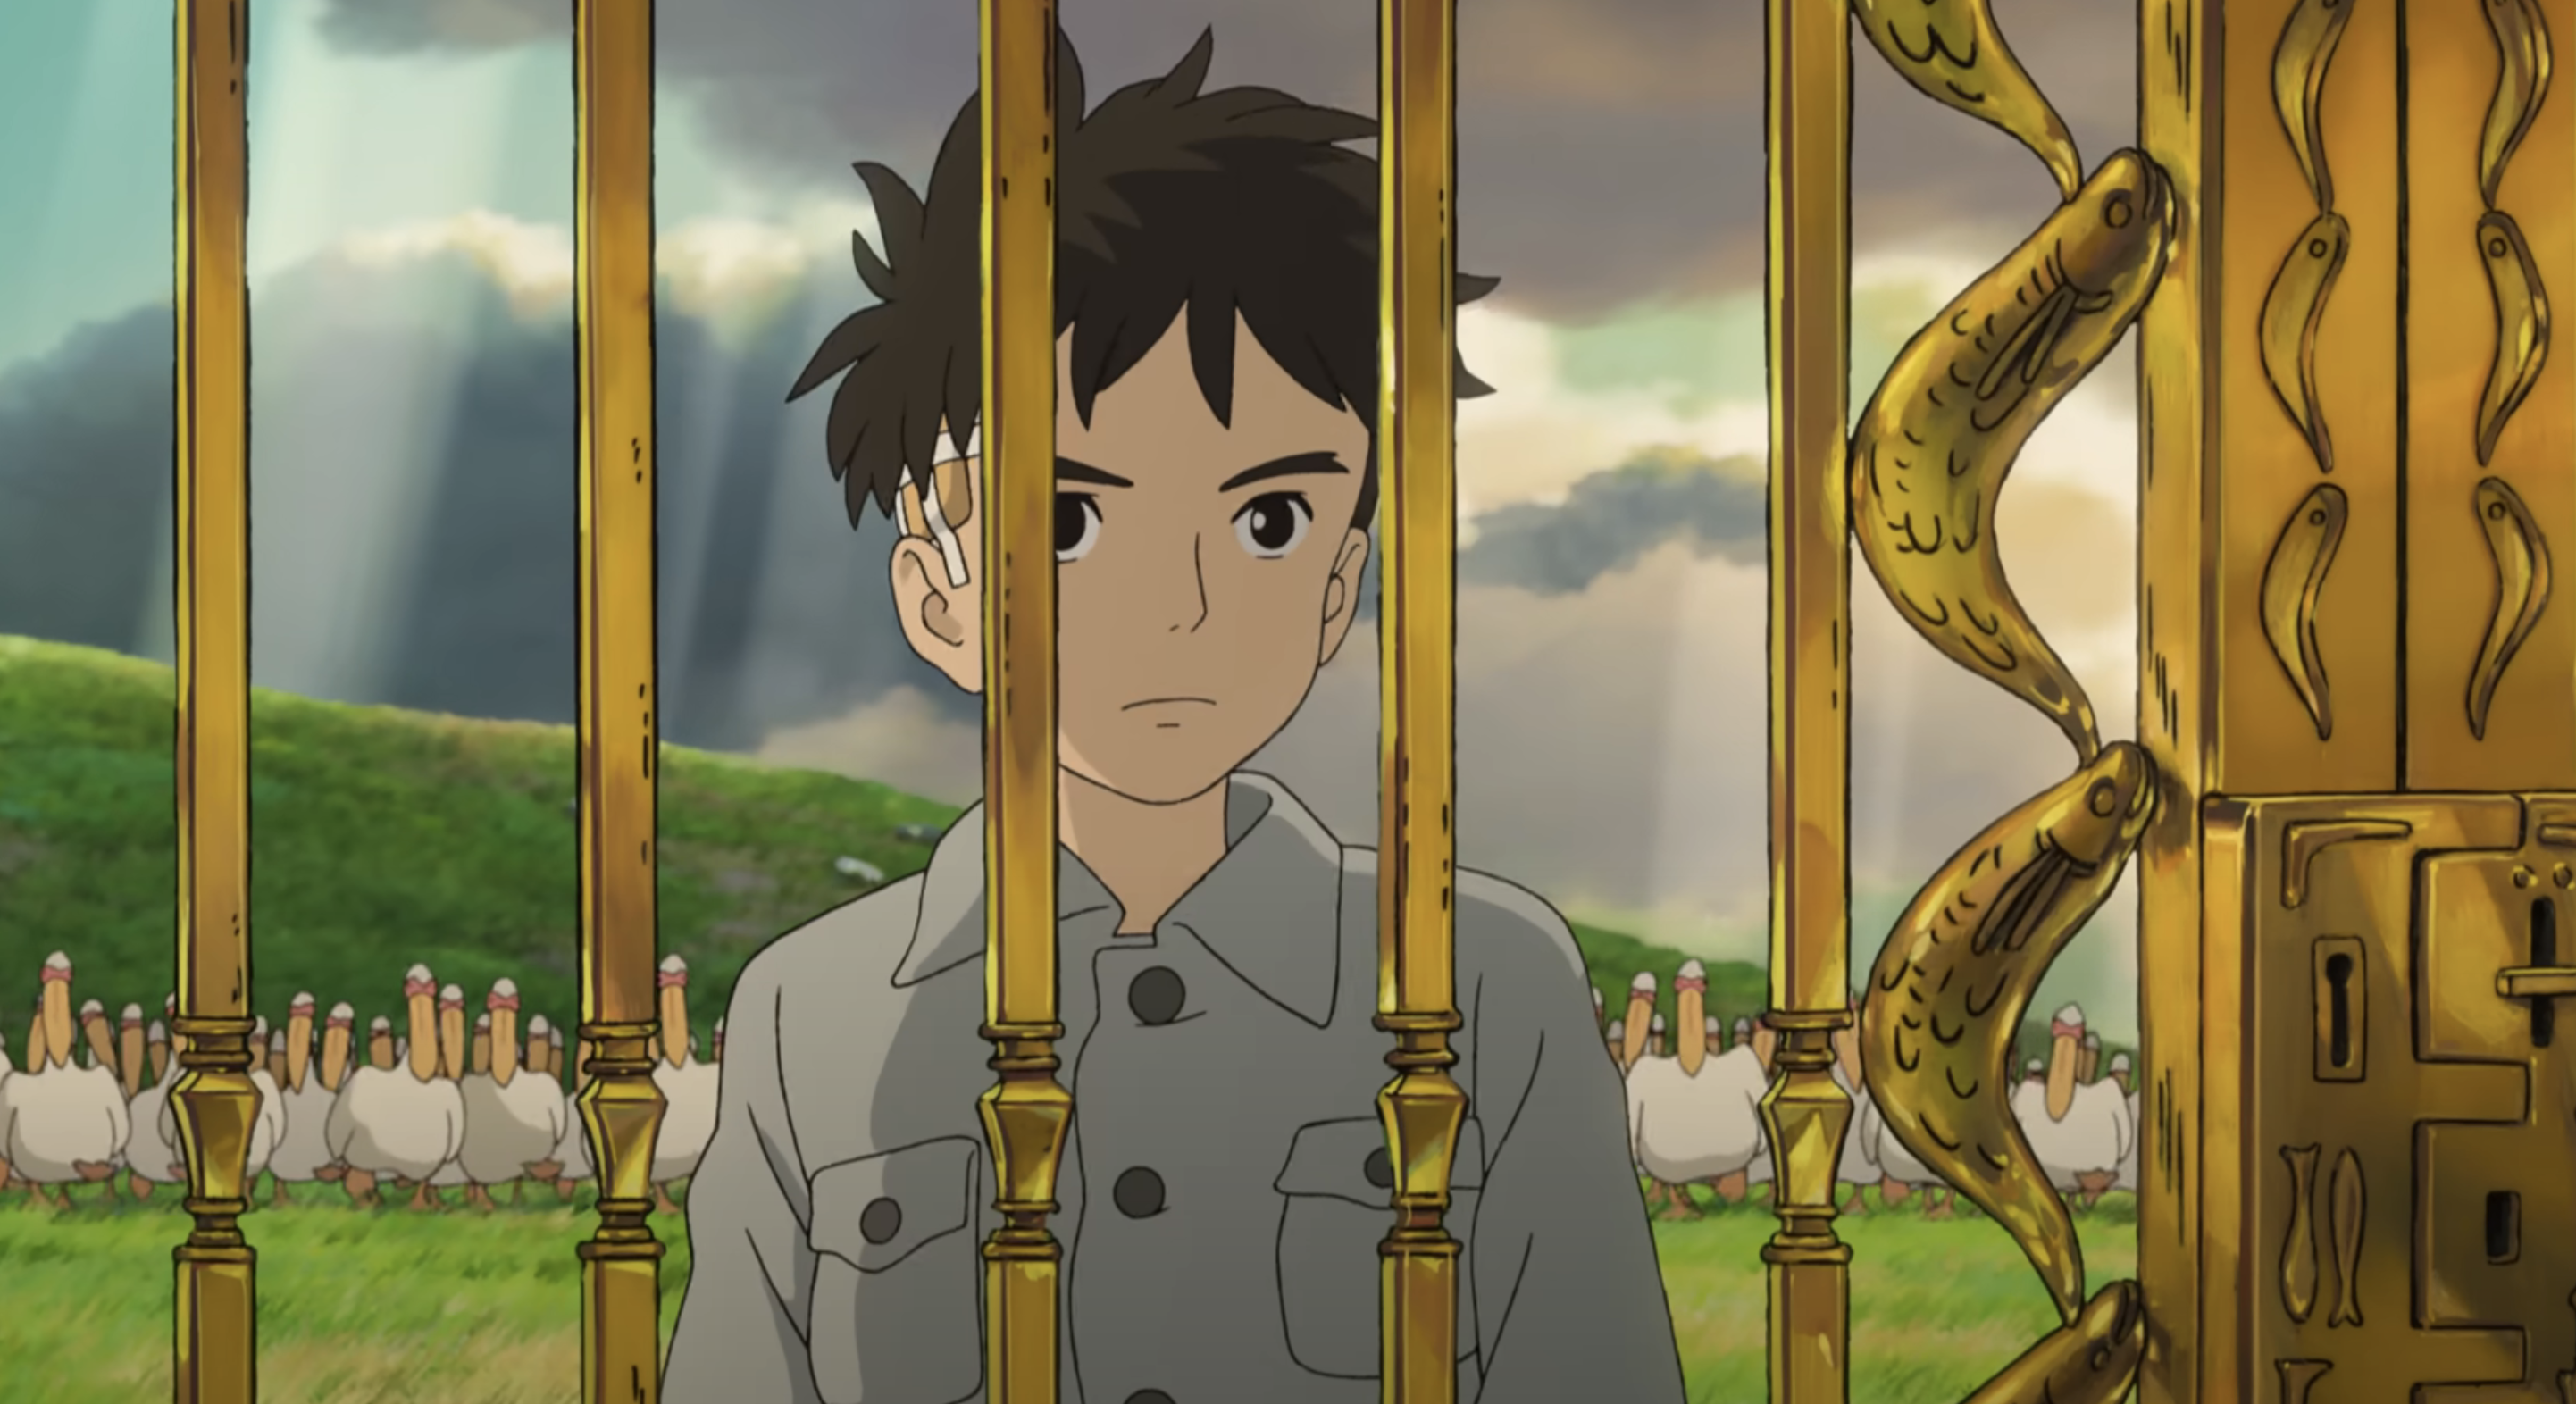 Animated character Mahito Maki looking solemn while standing near a fence with creatures in the background